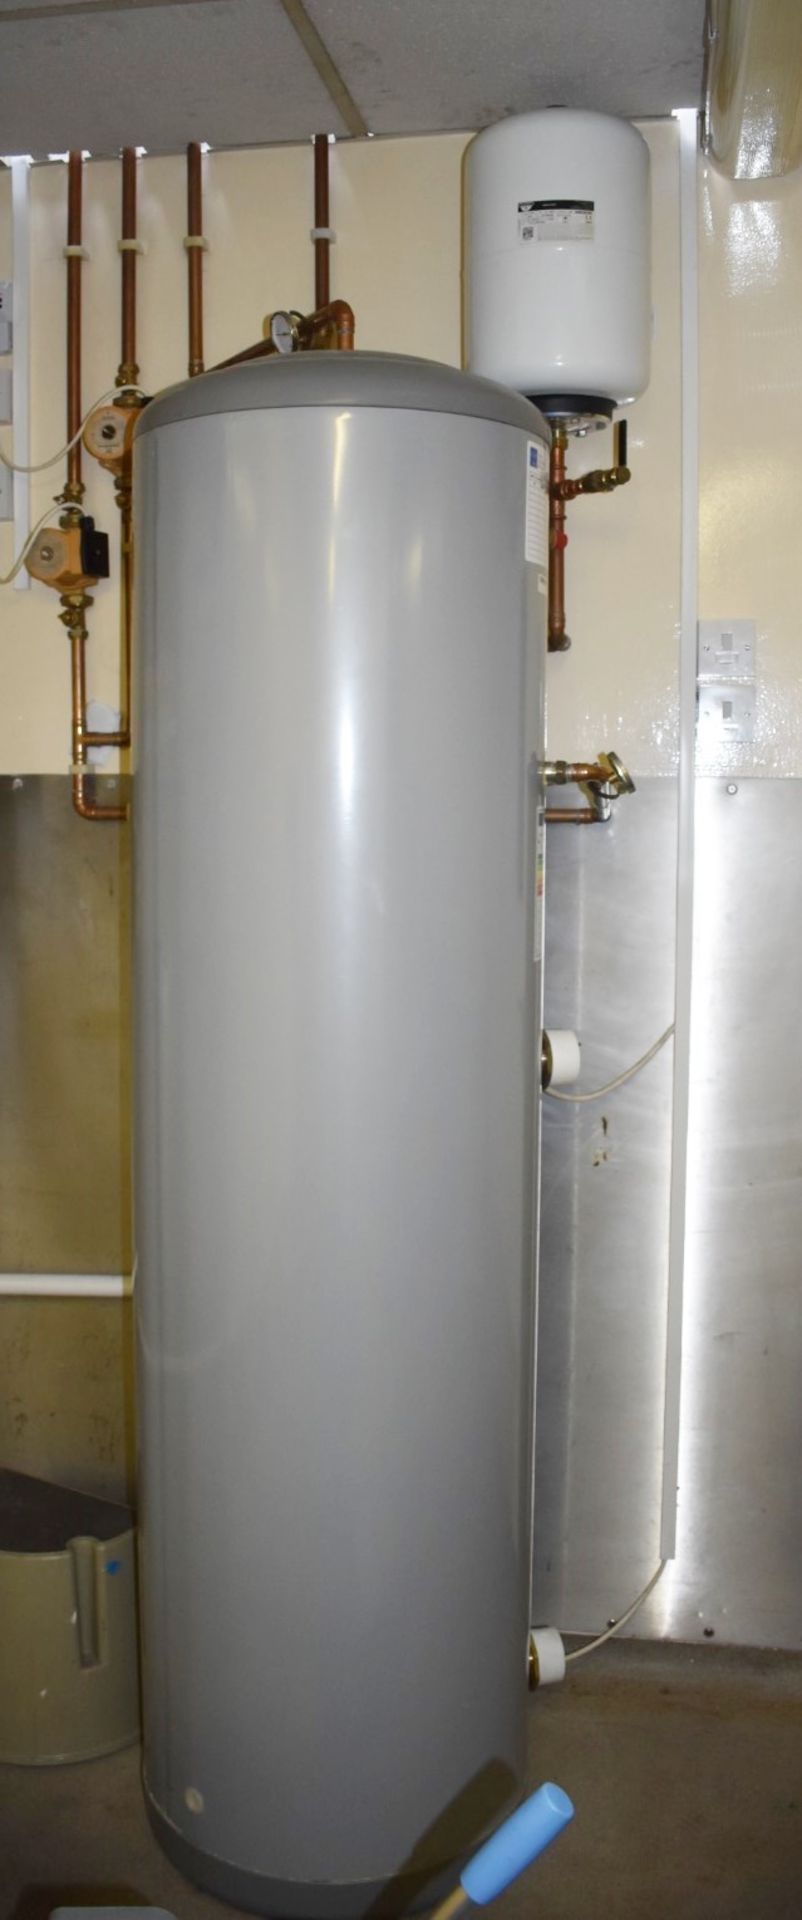 1 x Castle Unvented Hot Water Calorifier Cylinder 300l Tank With Zilmet 110 Ultra Pro 24 Litre - Image 9 of 12